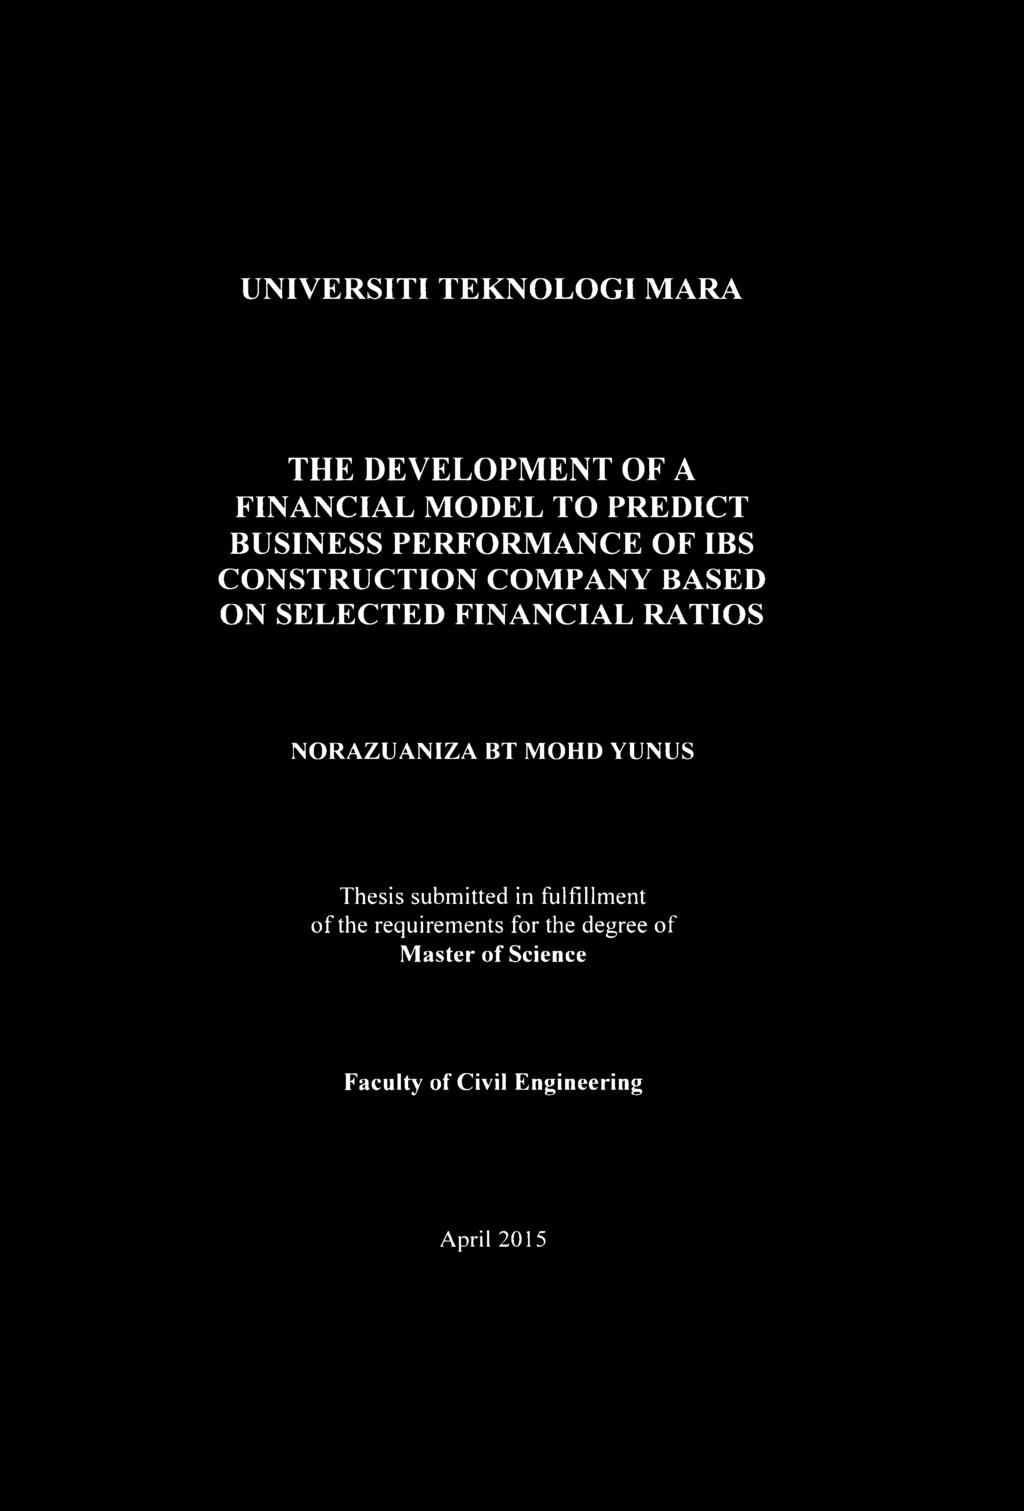 RATIOS NORAZUANIZA BT MOHD YUNUS Thesis submitted in fulfillment of the